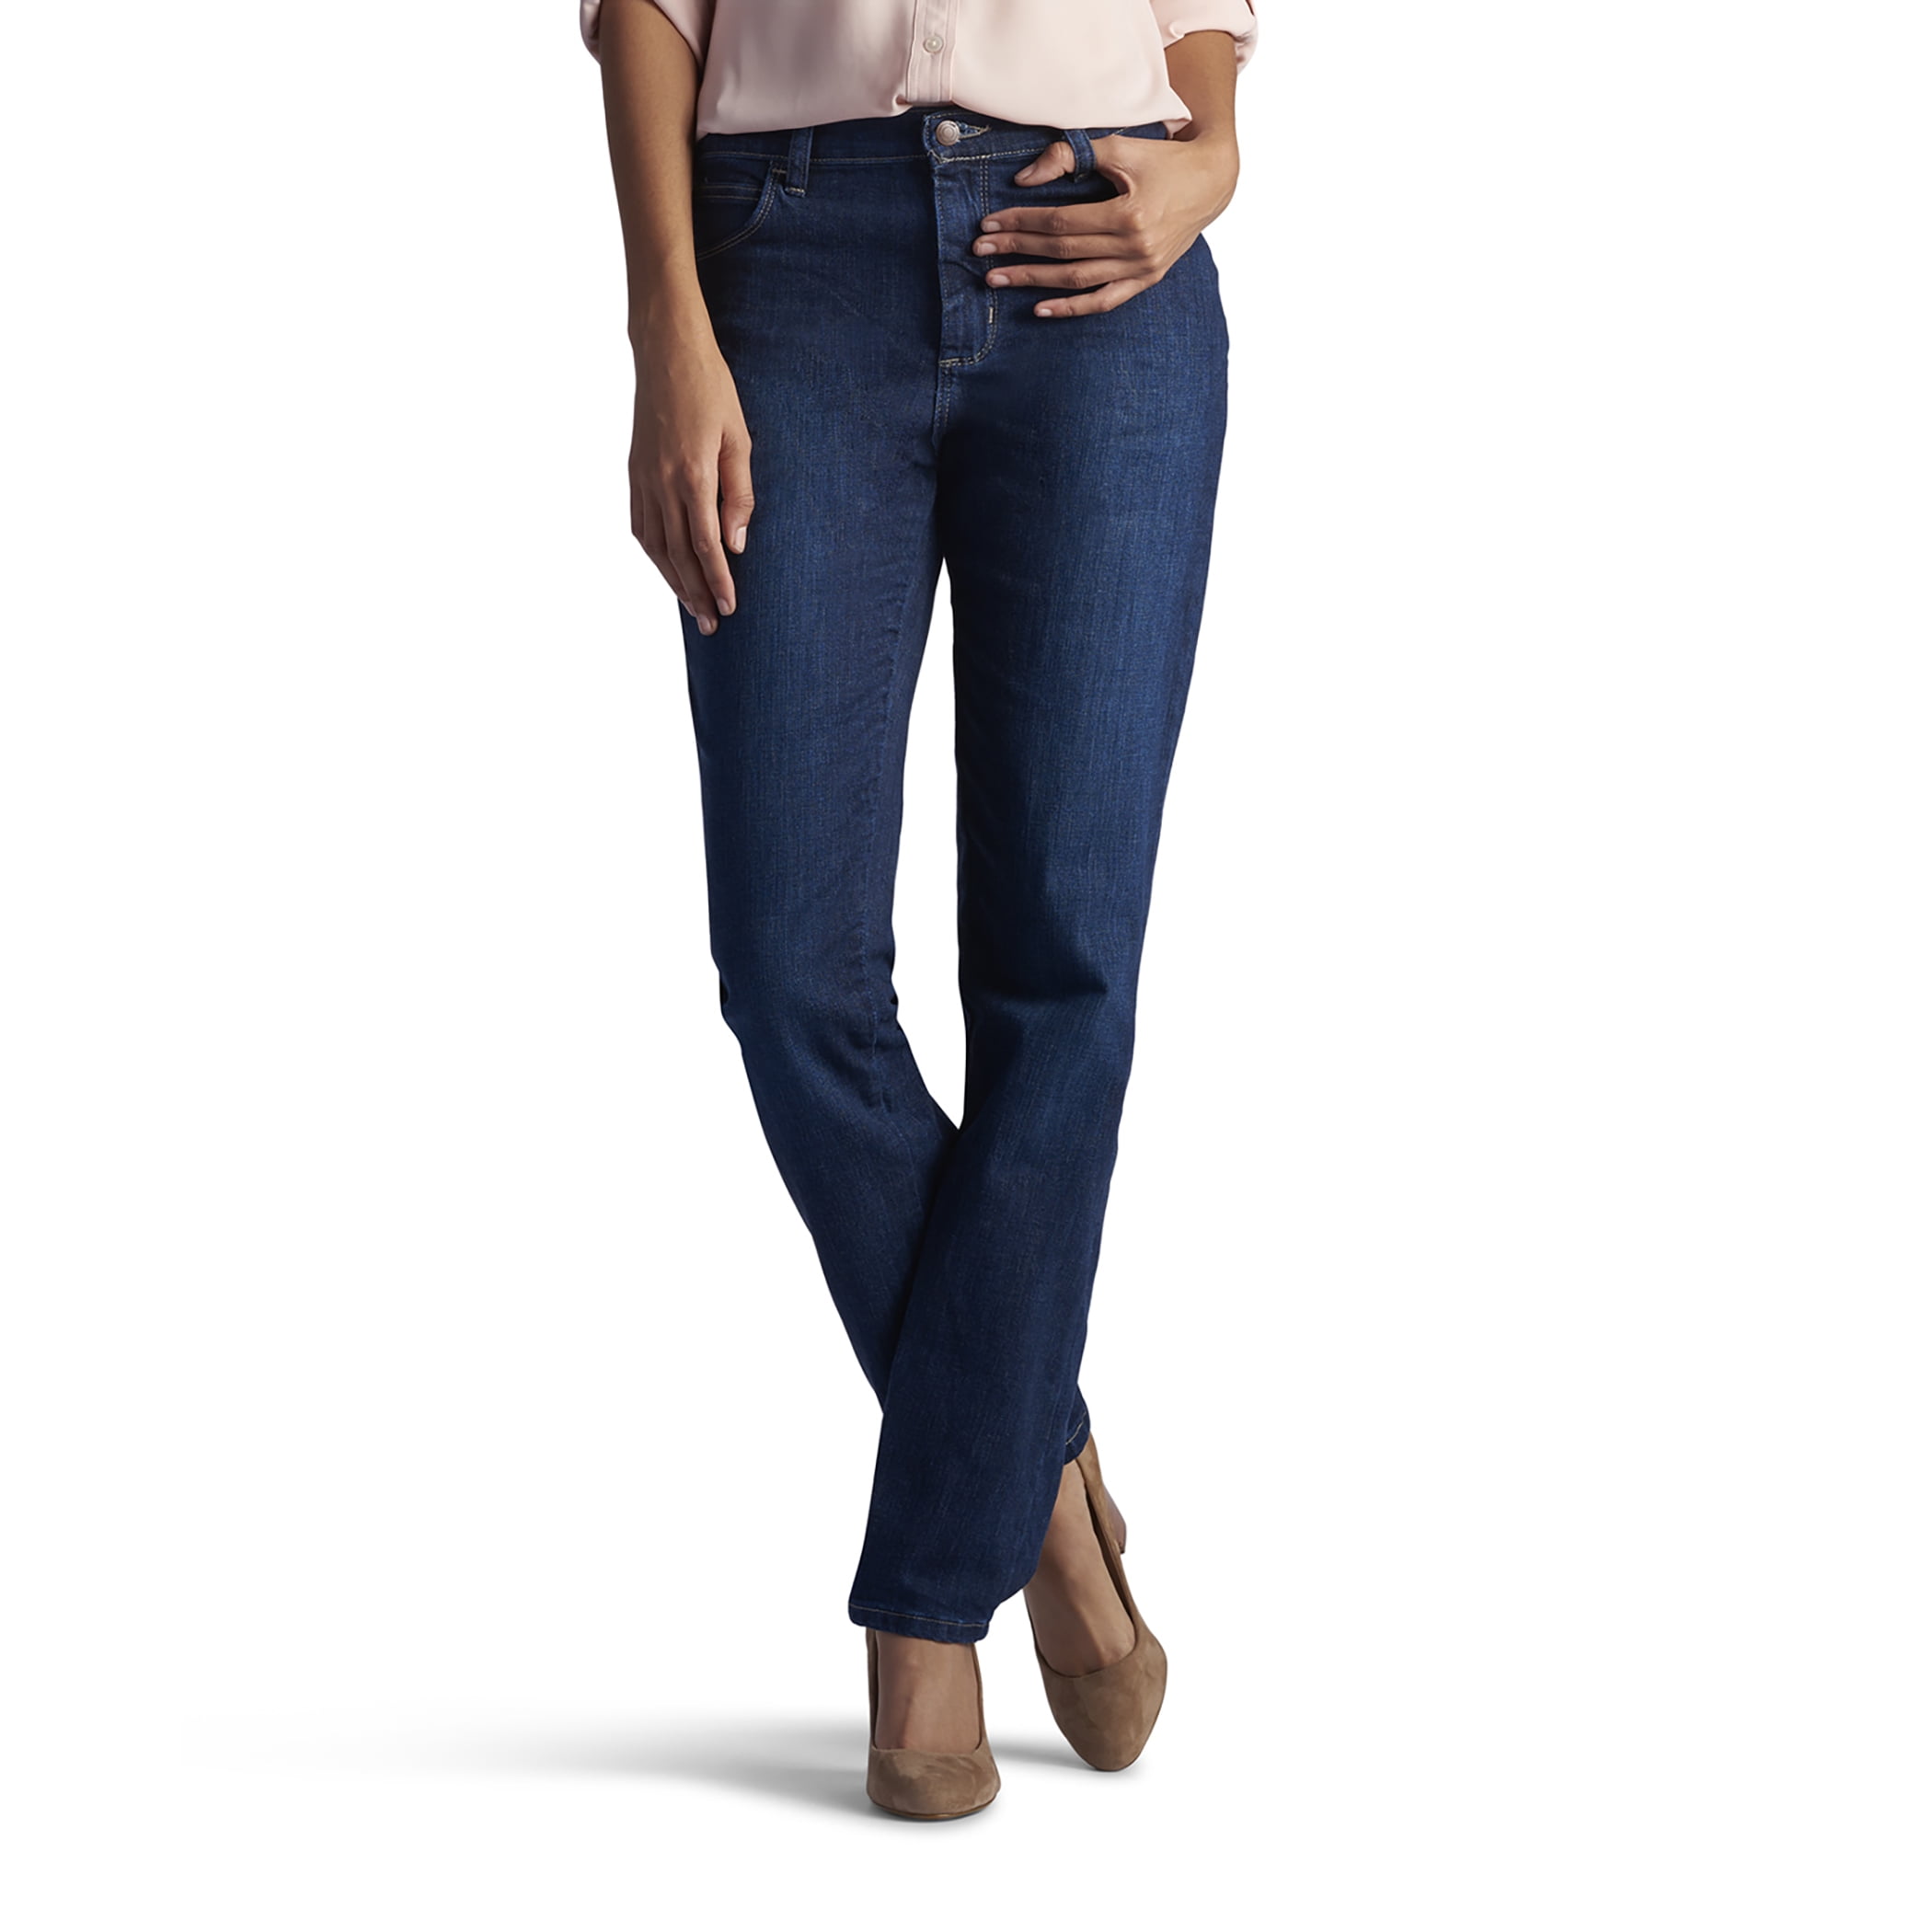 Lee Women's Relaxed Fit Straight Leg Jeans 